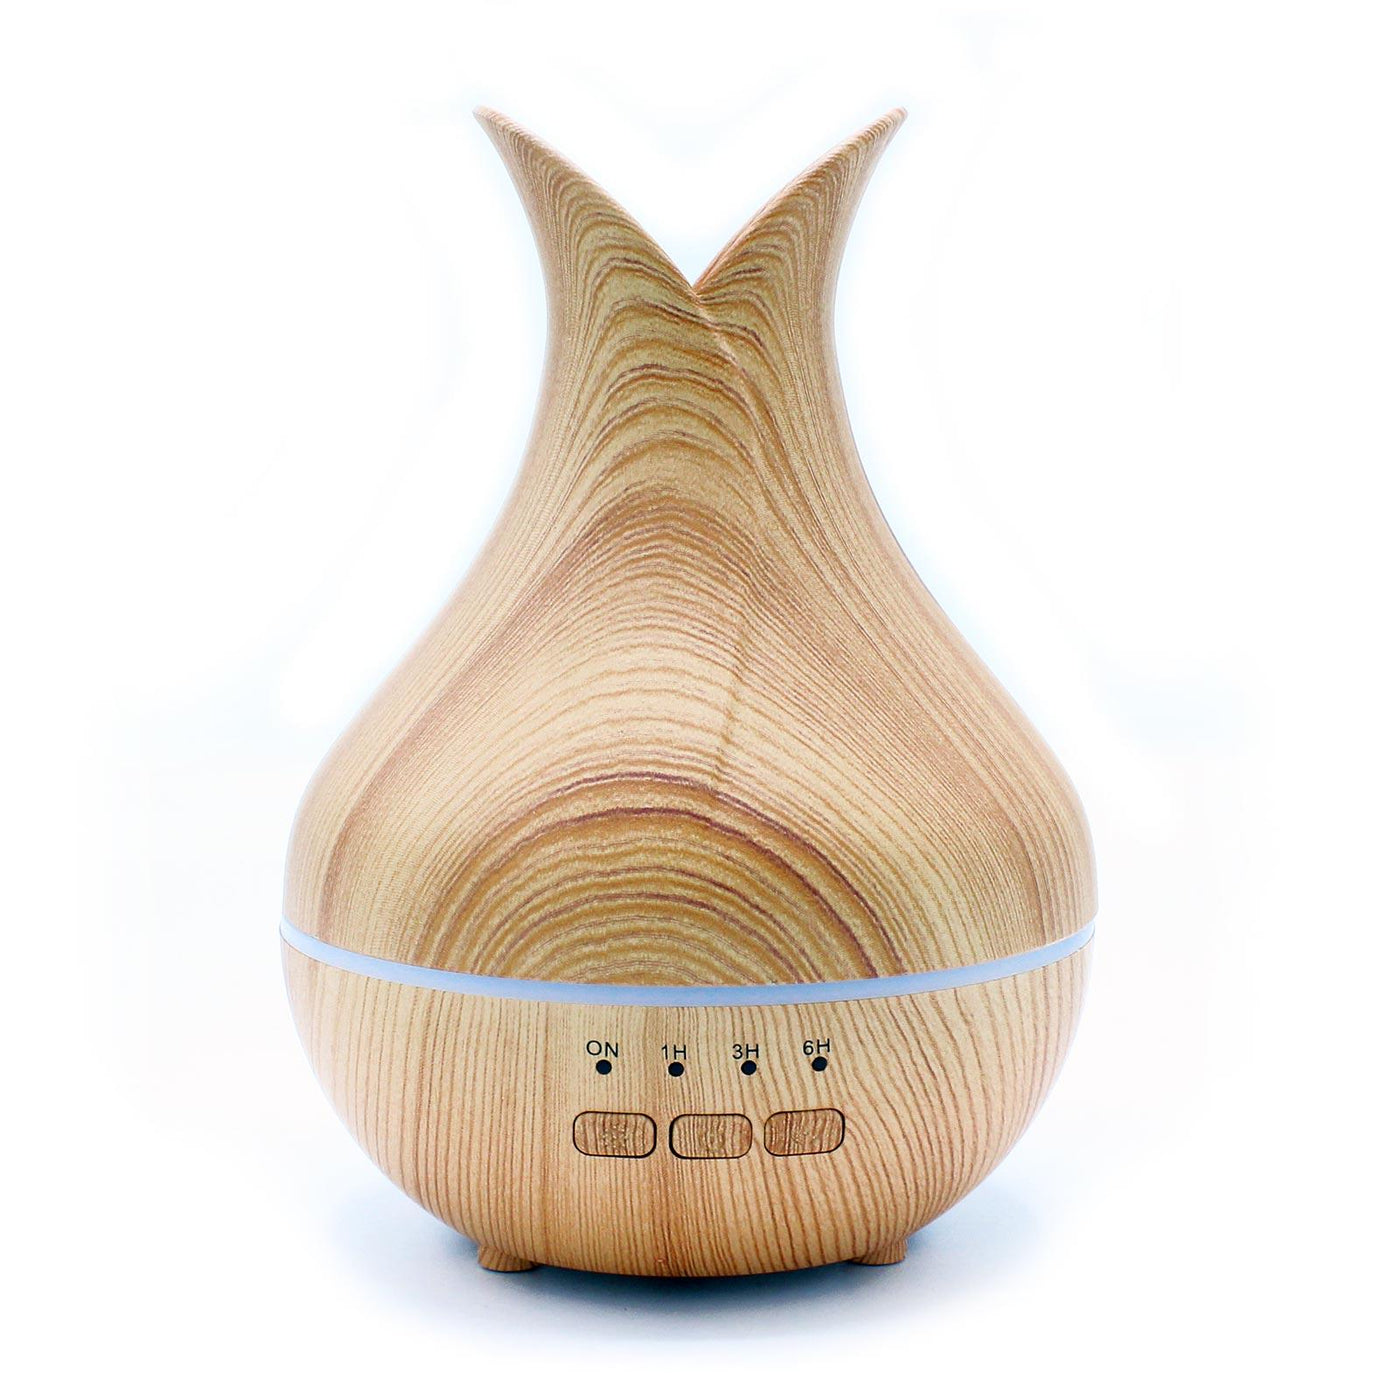 Palermo Ultrasonic Aroma Diffuser With USB Light Colour Change And Timer.